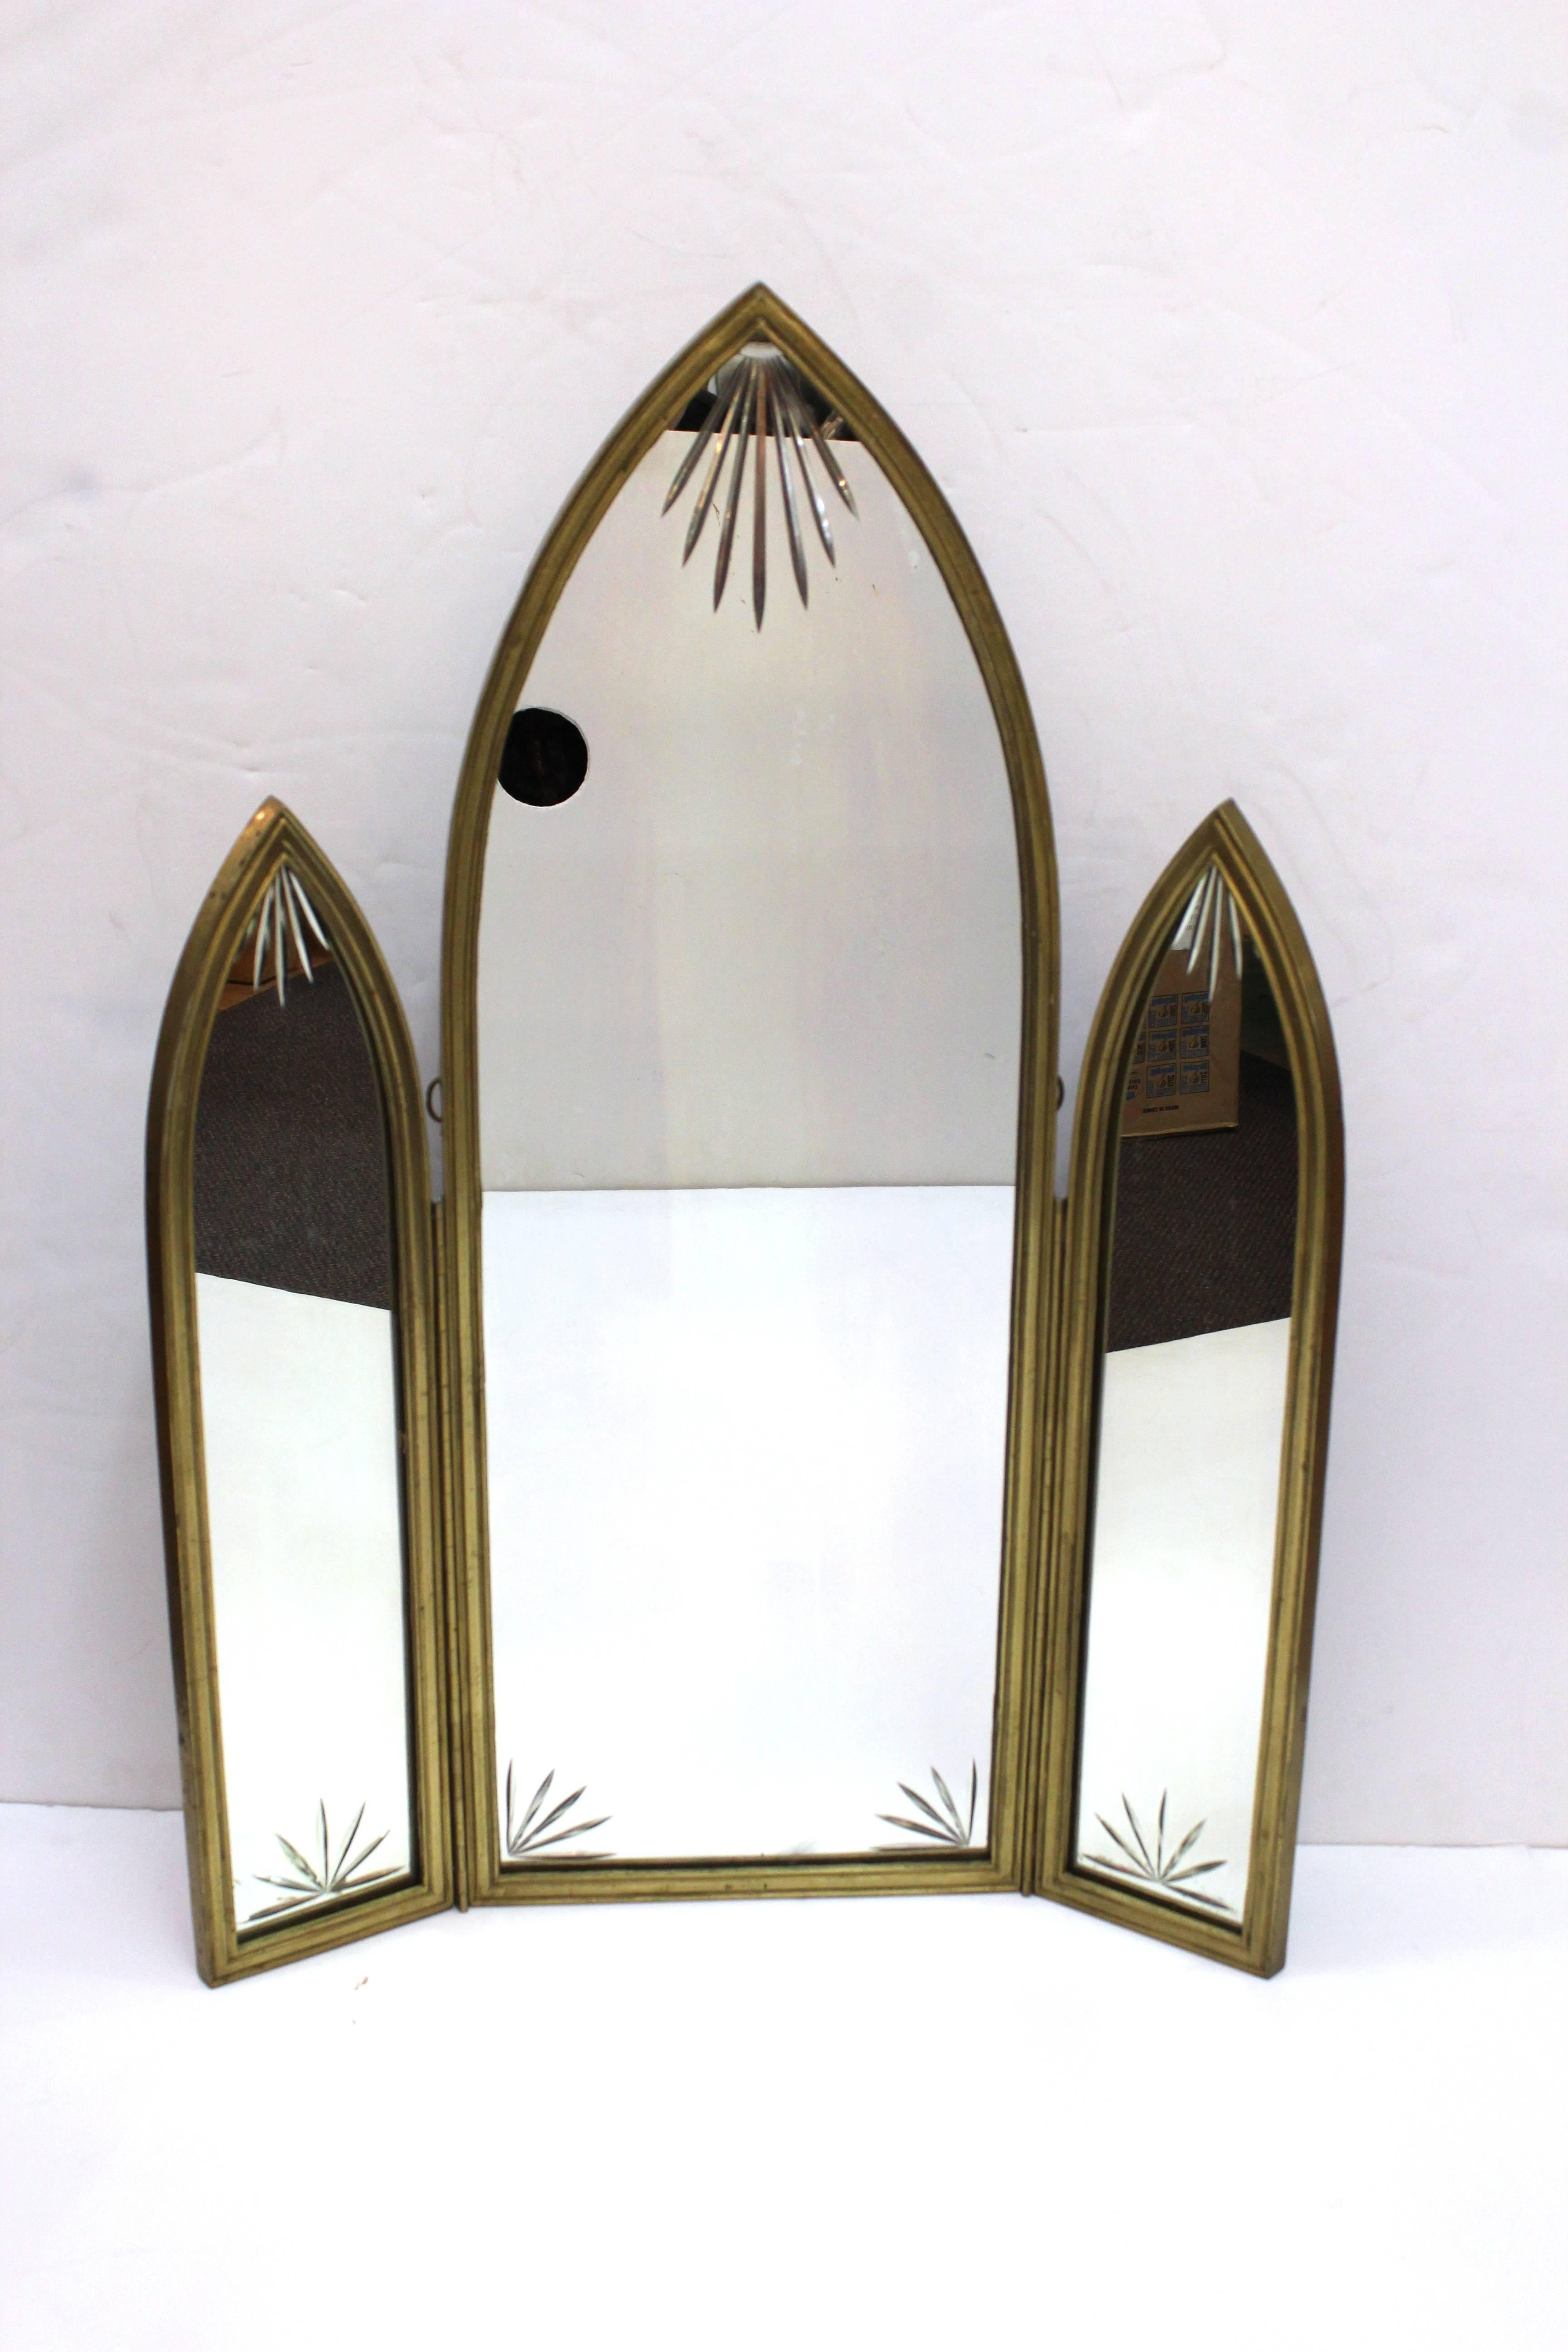 A French Art Deco triptych mirror in bronze with one central panel flanked by two smaller panels that fold outwards on a hinge. Each corner of the glass features a sunburst motif. The mirror is in good vintage condition and has wear consistent with